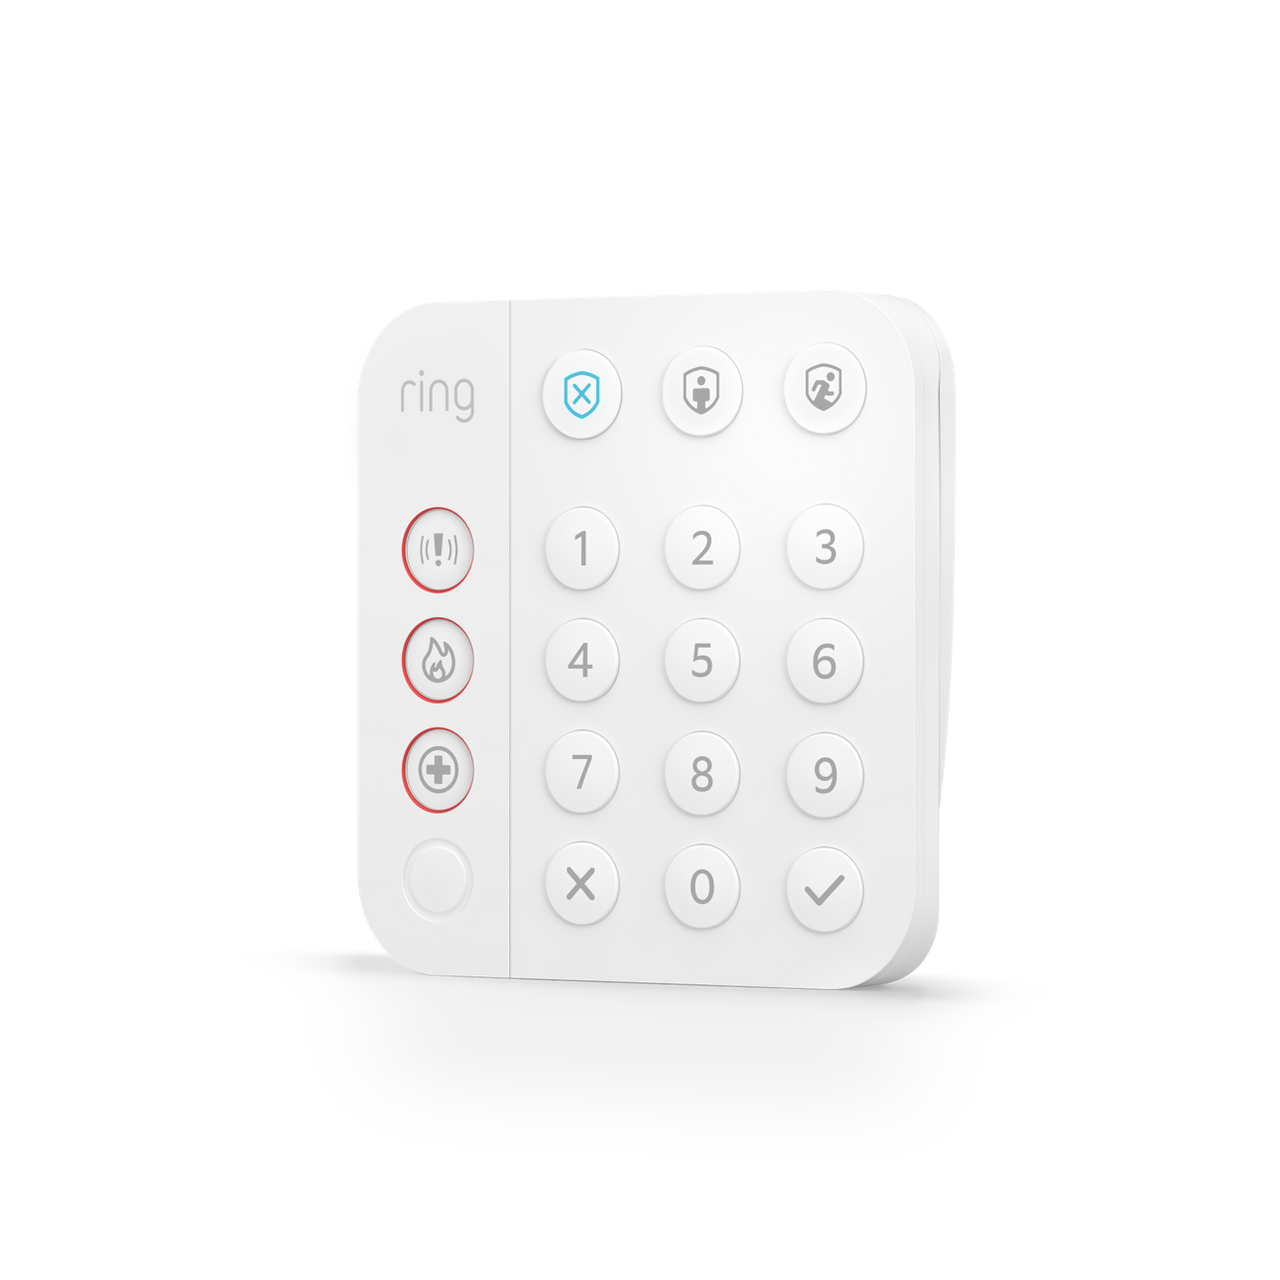 products/Alarm2.0-keypad_angled_1290x1290_1d459a4a-aadc-40bf-82cb-c38e95a647ff.png